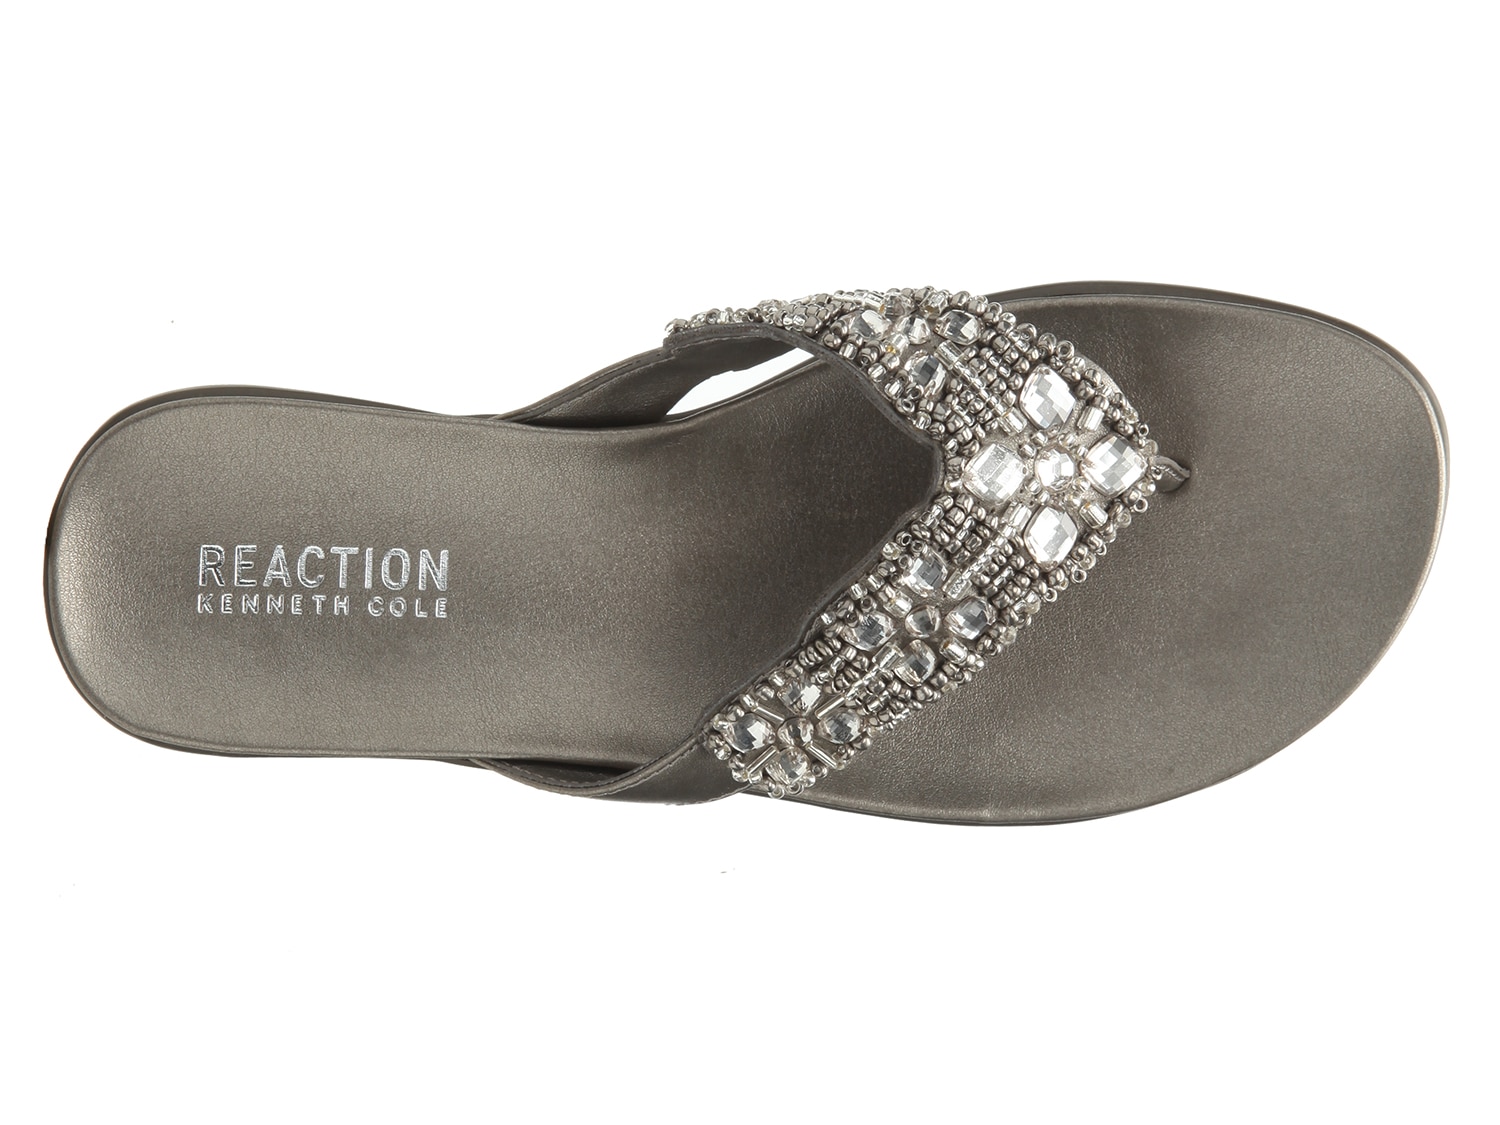 kenneth cole reaction sandals dsw